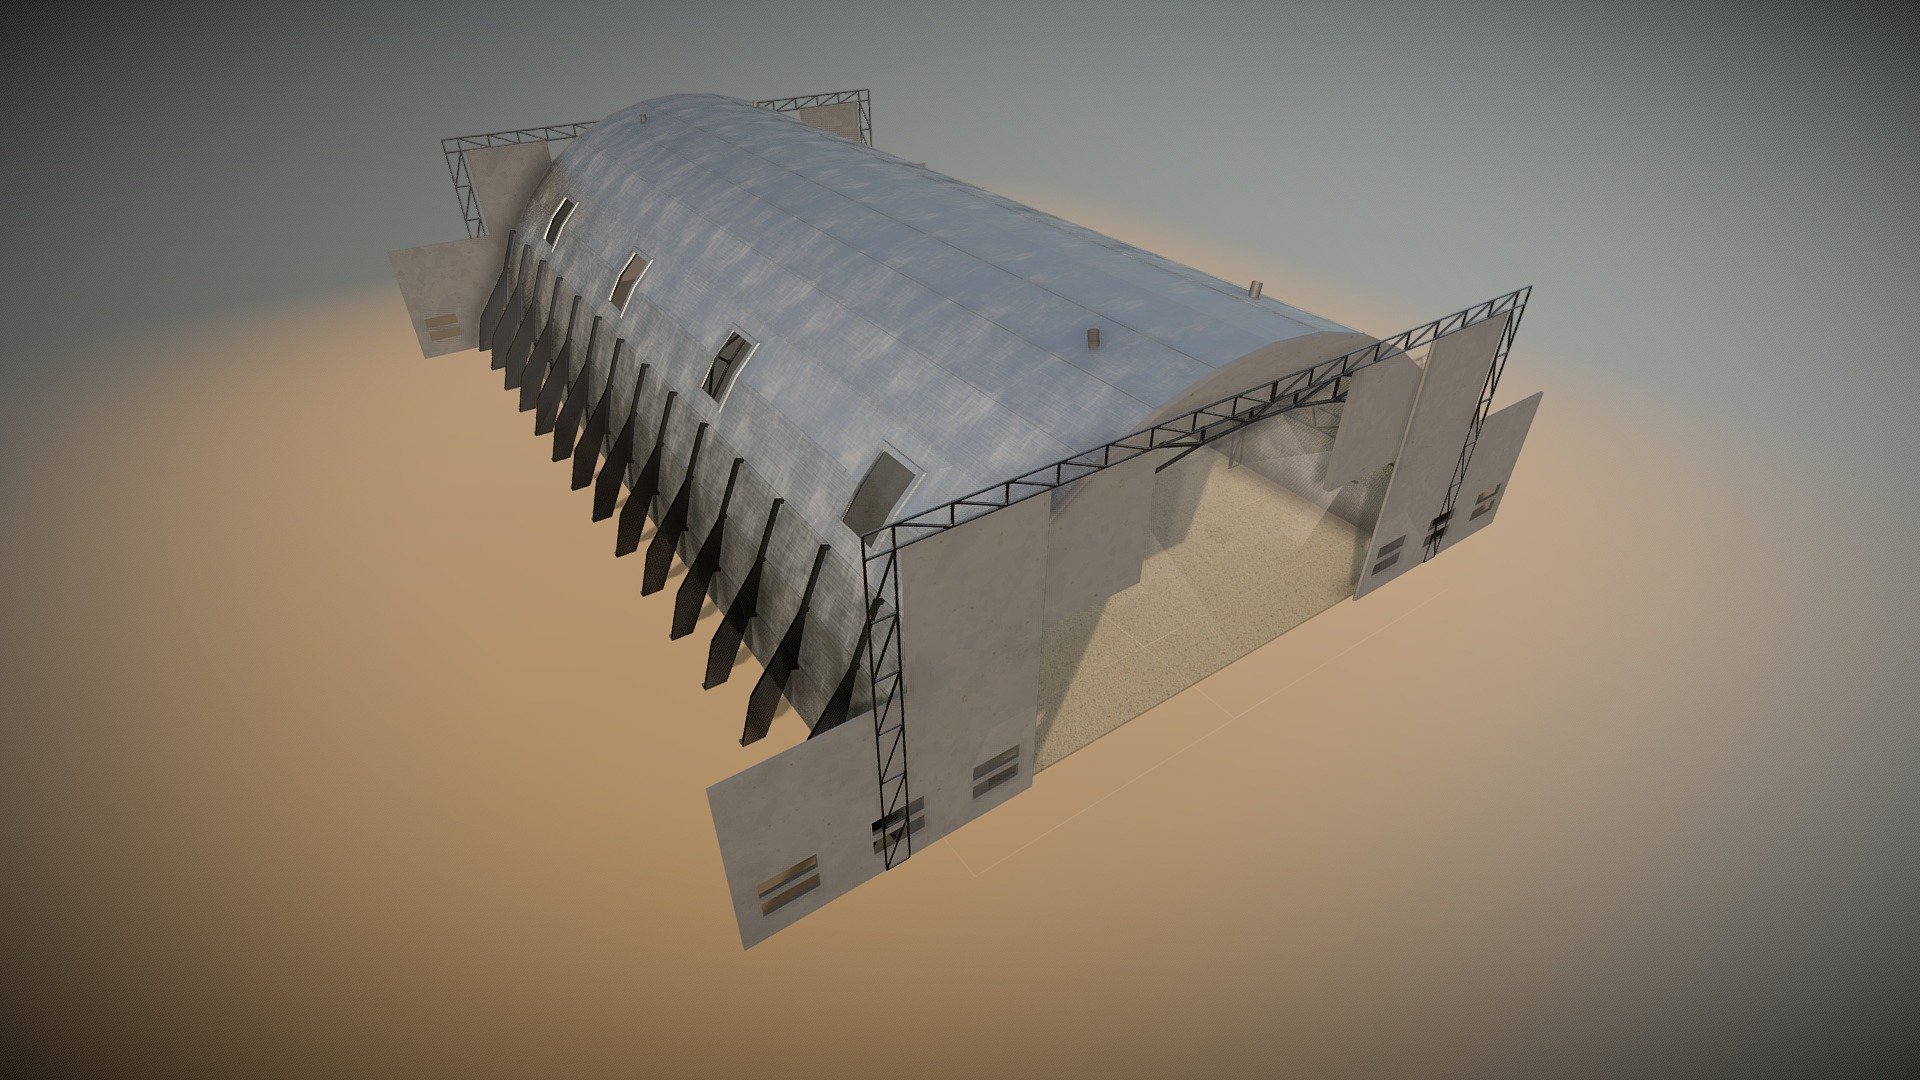 Hangar for aircrafts - fighter section

54 x 30 x 15 meters

Doors on both sides



Perfect for displaying aircrafts. Many parts modeled using modifiers stack what allows to easily alter design.



Check also my aircrafts and cars lowpoly models.

Patreon with monthly free model - Hangar - Buy Royalty Free 3D model by NETRUNNER_pl 3d model